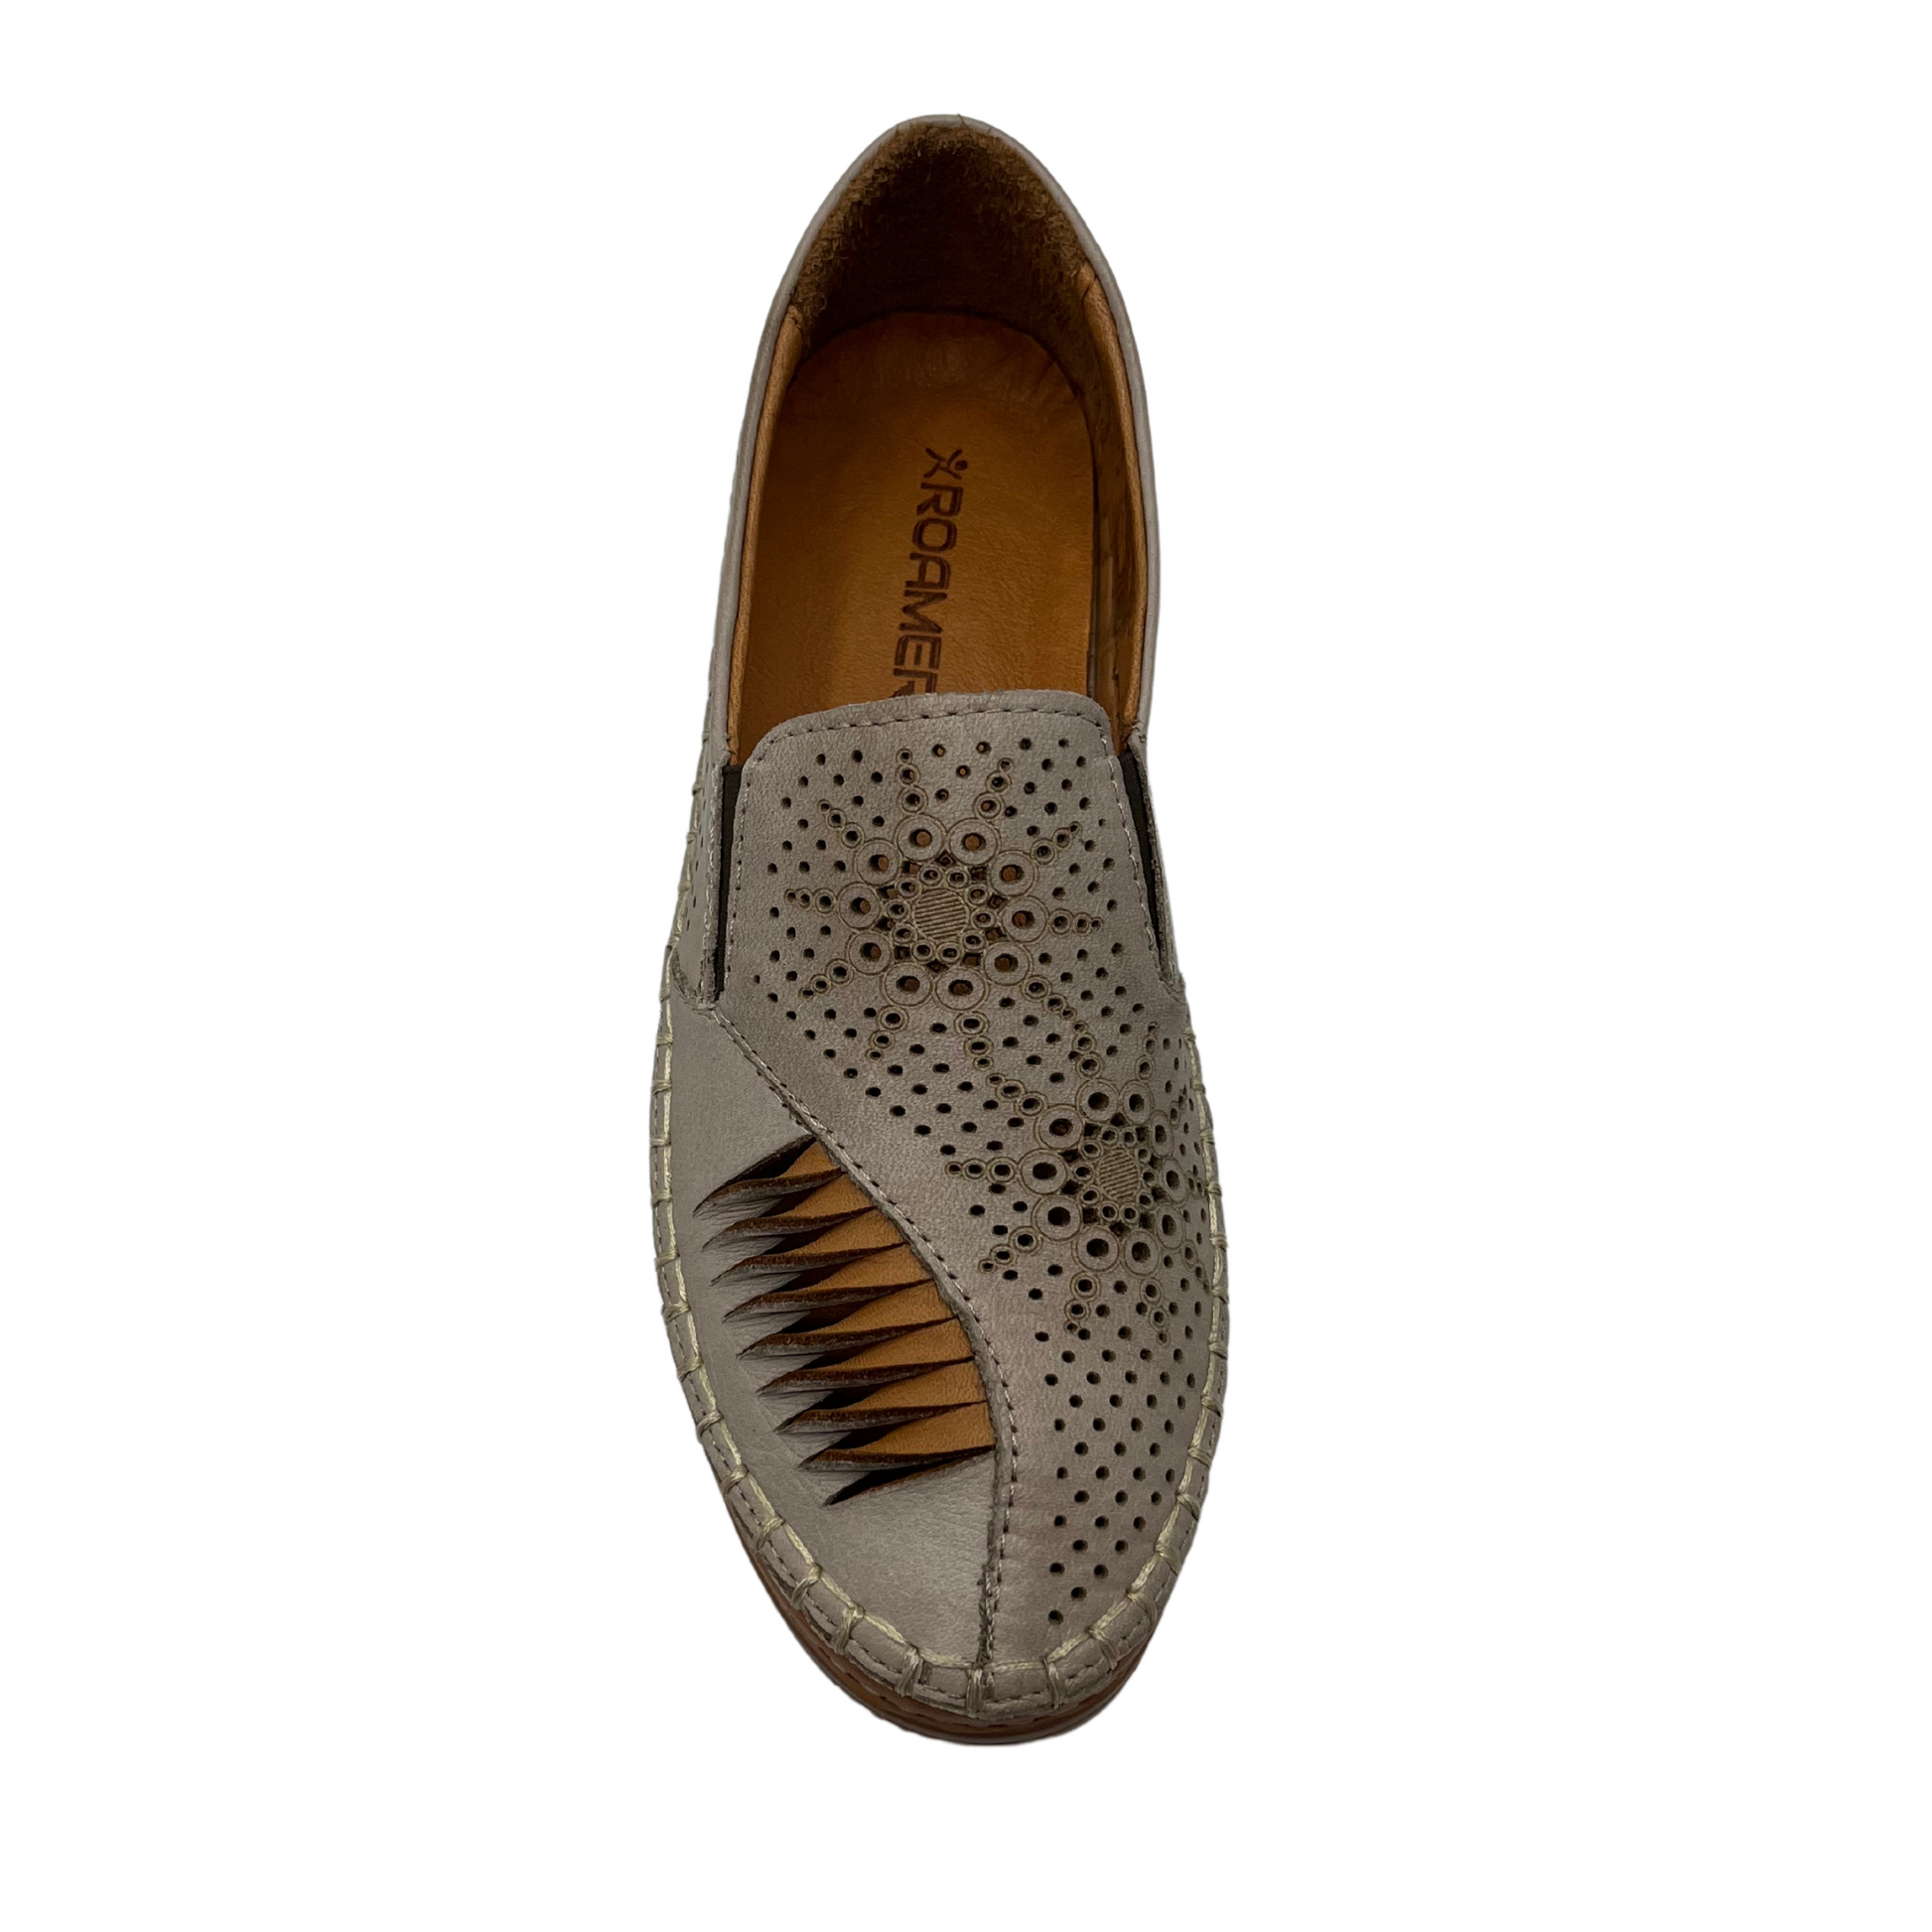 Top view of off white shoe with embossed details with inner brown lining